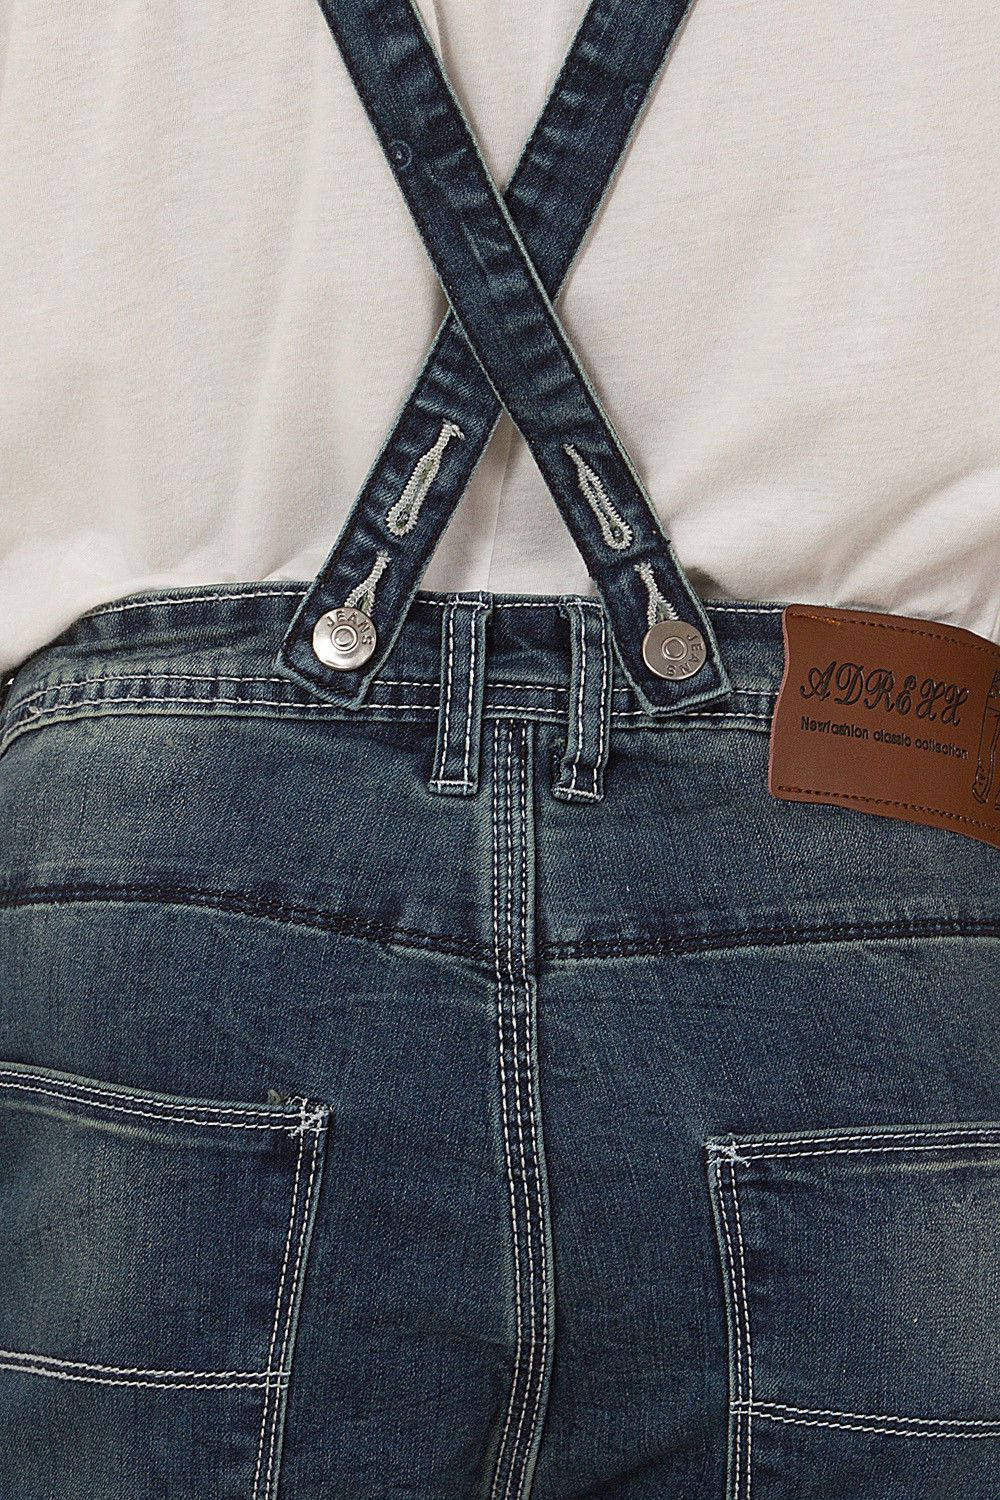 Close-up of strap fastening, back pockets and denim detailing from ‘Guy’ brand detachable bib dungaree shorts from Dungarees Online.